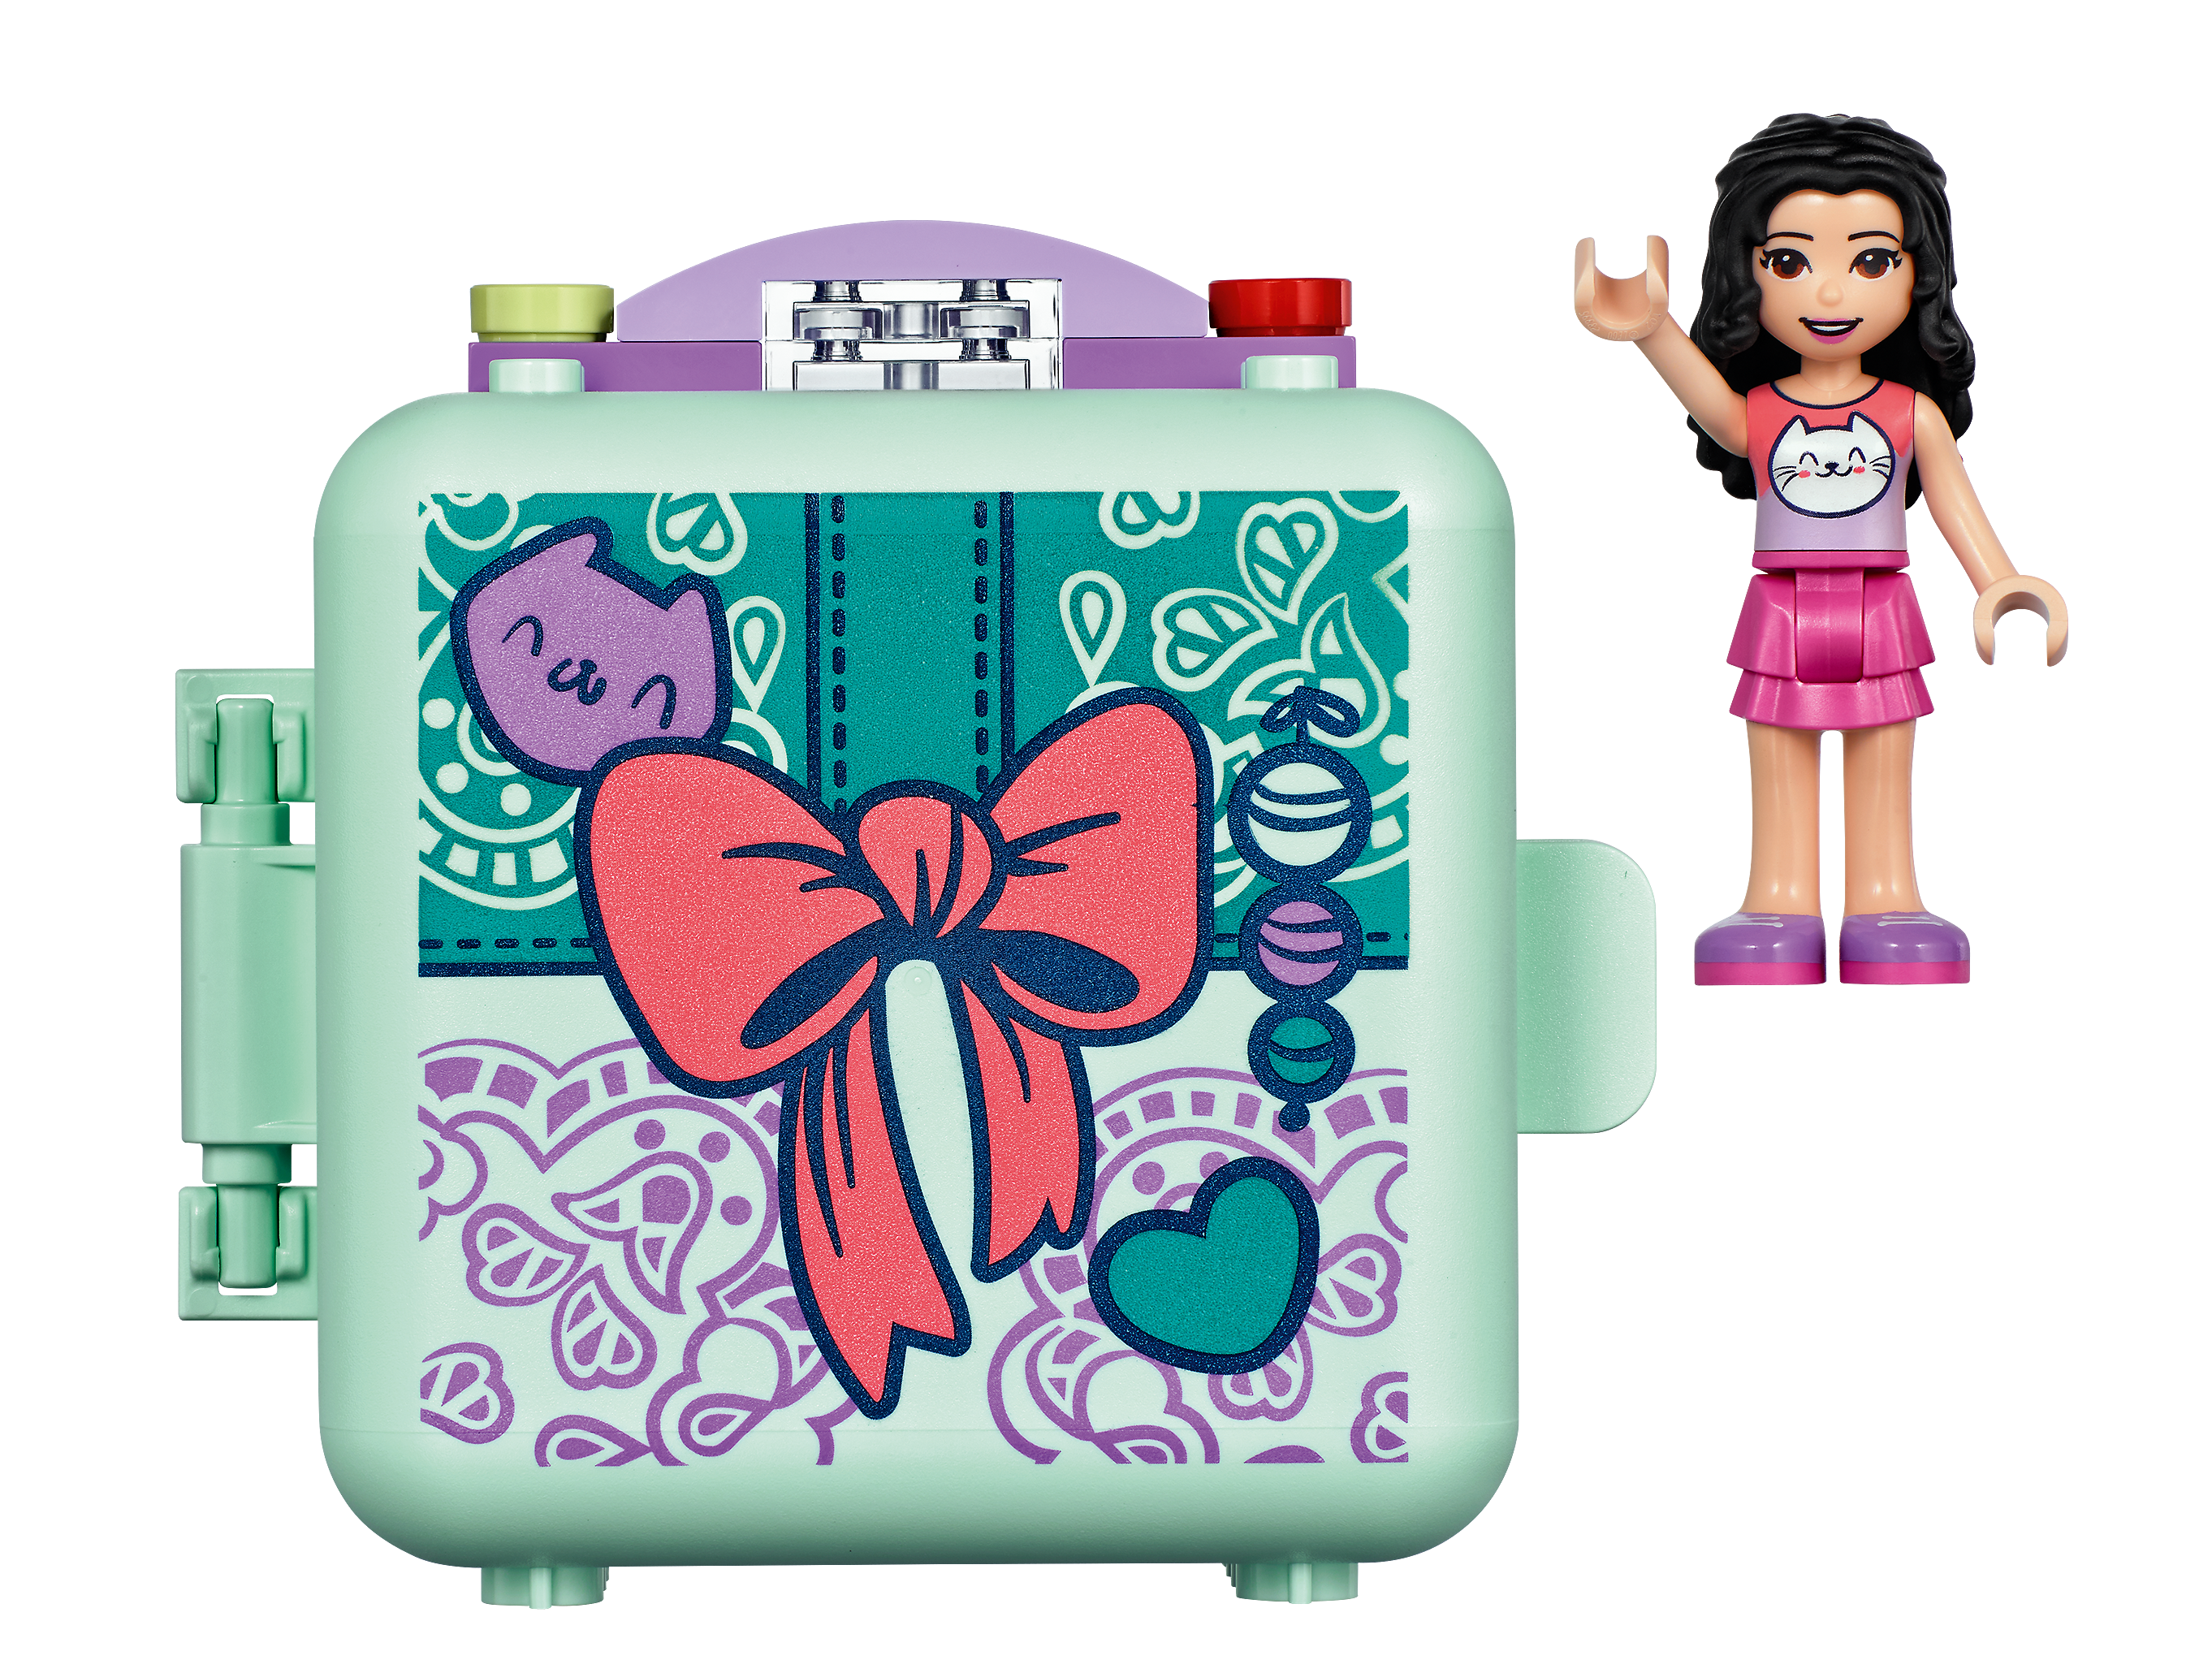 58 Pieces LEGO Friends Emma’s Fashion Cube 41668 Building Kit; Mini-Doll Figure Toy is for Creative Kids; Portable Toy for Vacation Play; New 2021 